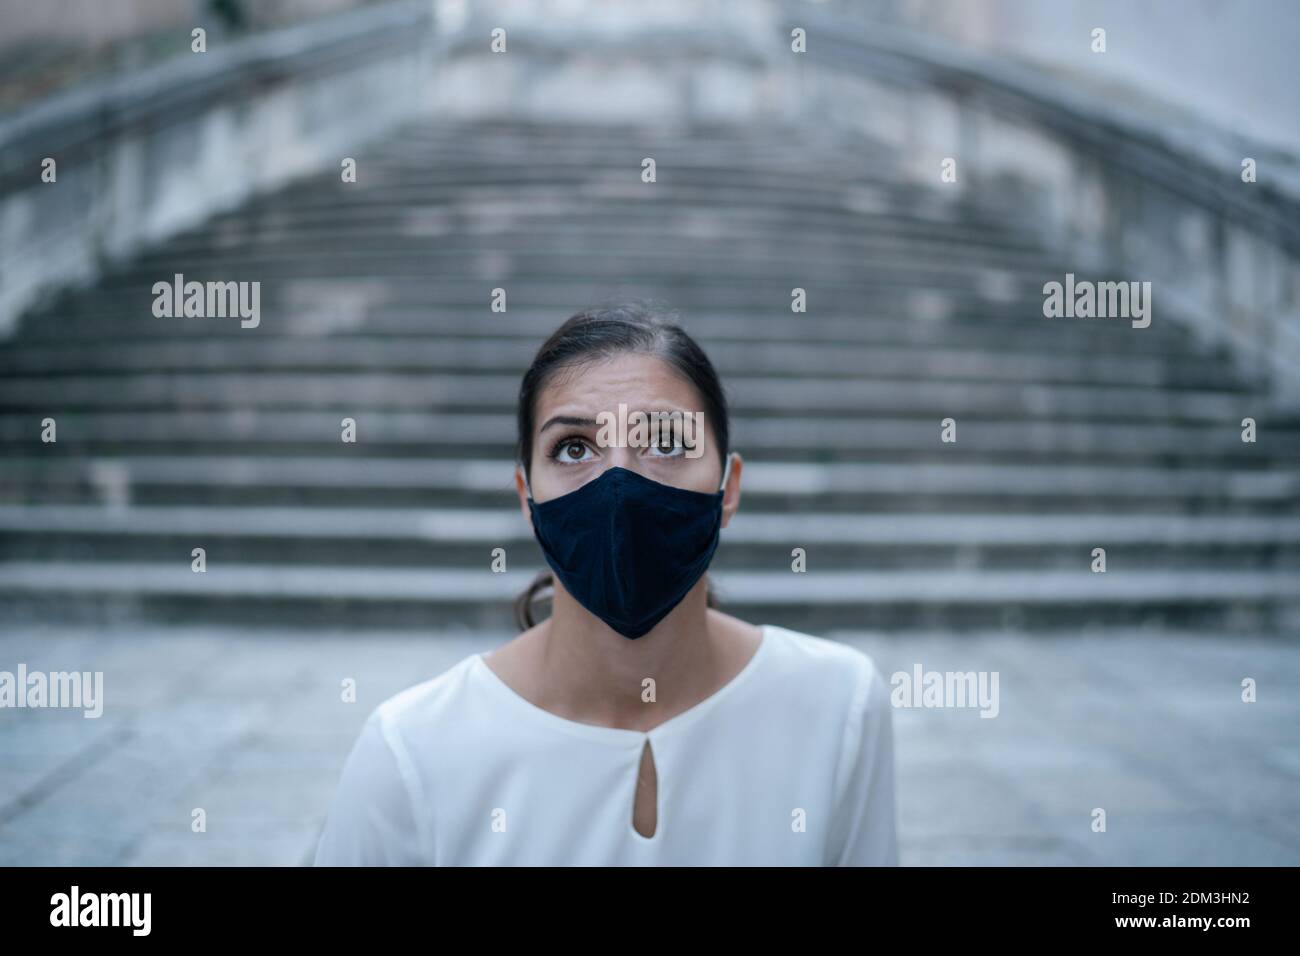 Fearful woman looking shocked/sceptic wearing a face mask in empty streets.Pandemic future concept.Negative emotions,stress,anxiety and panic amid cor Stock Photo